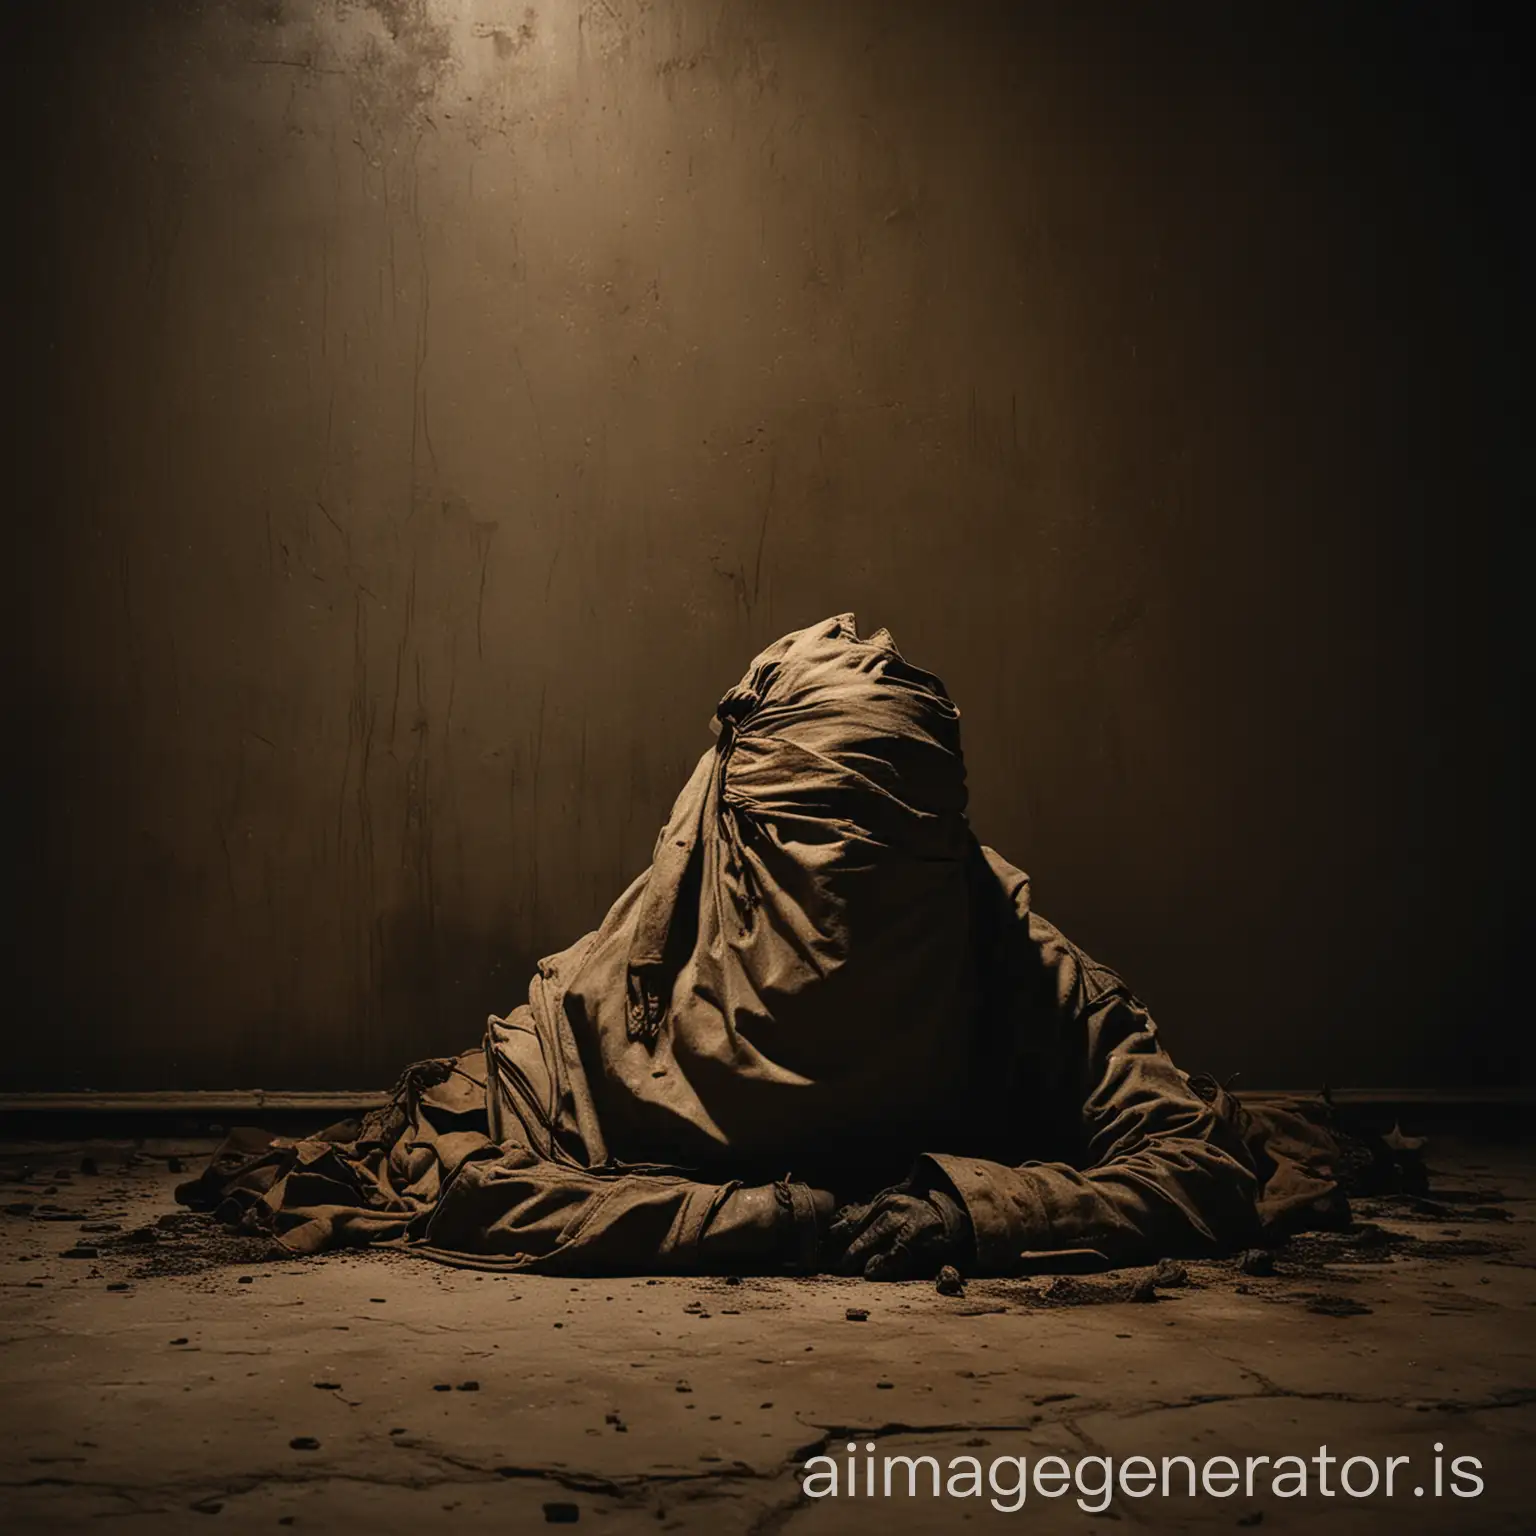 dead hostage, lying against a wall, with a bag covering his face, in a dark room on fire